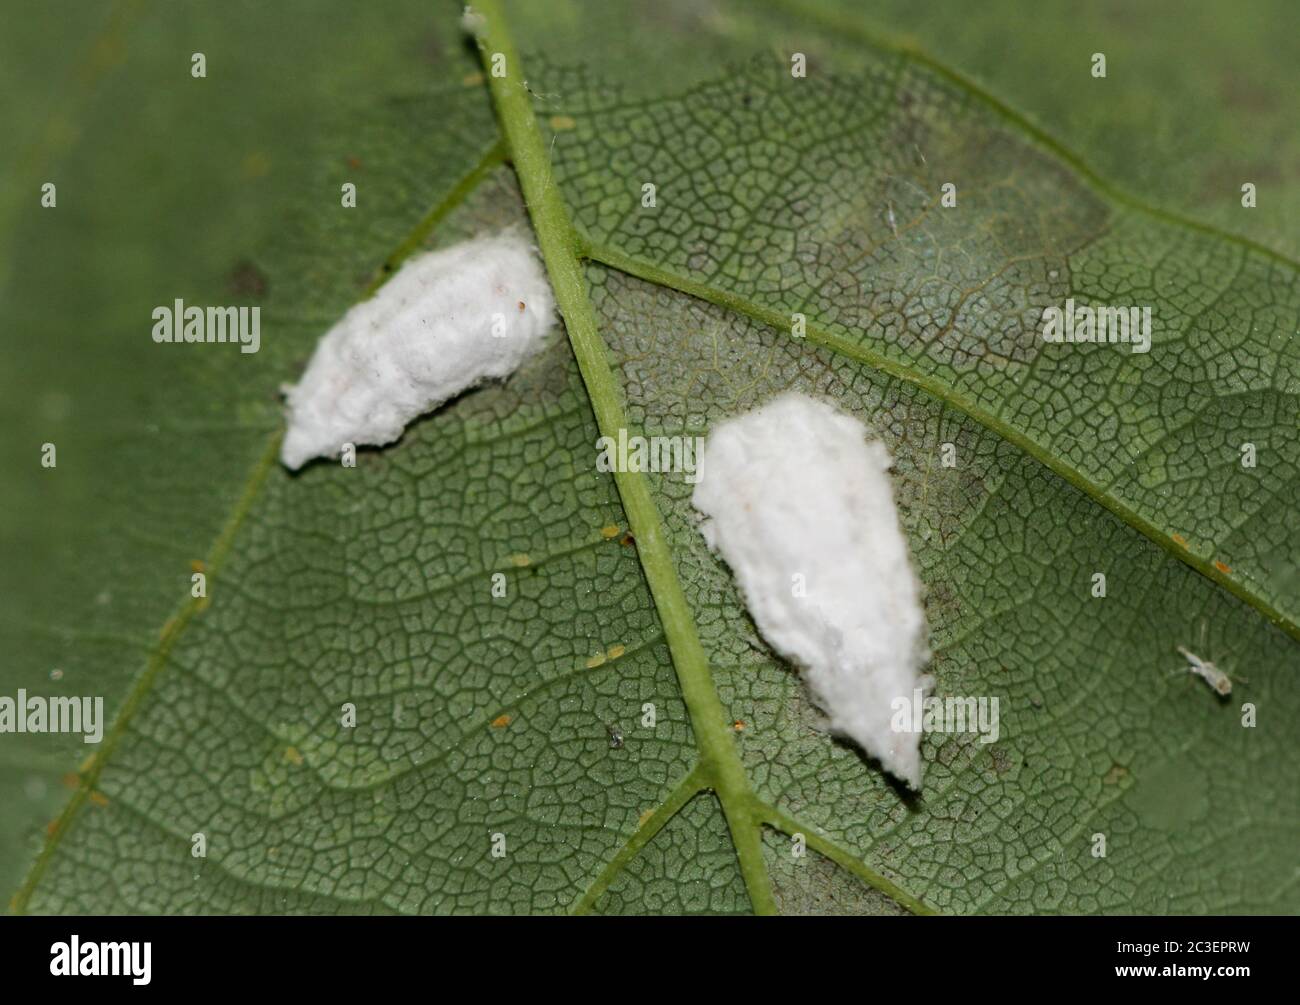 Macro shot of two white pests on the underside of a leaf Stock Photo